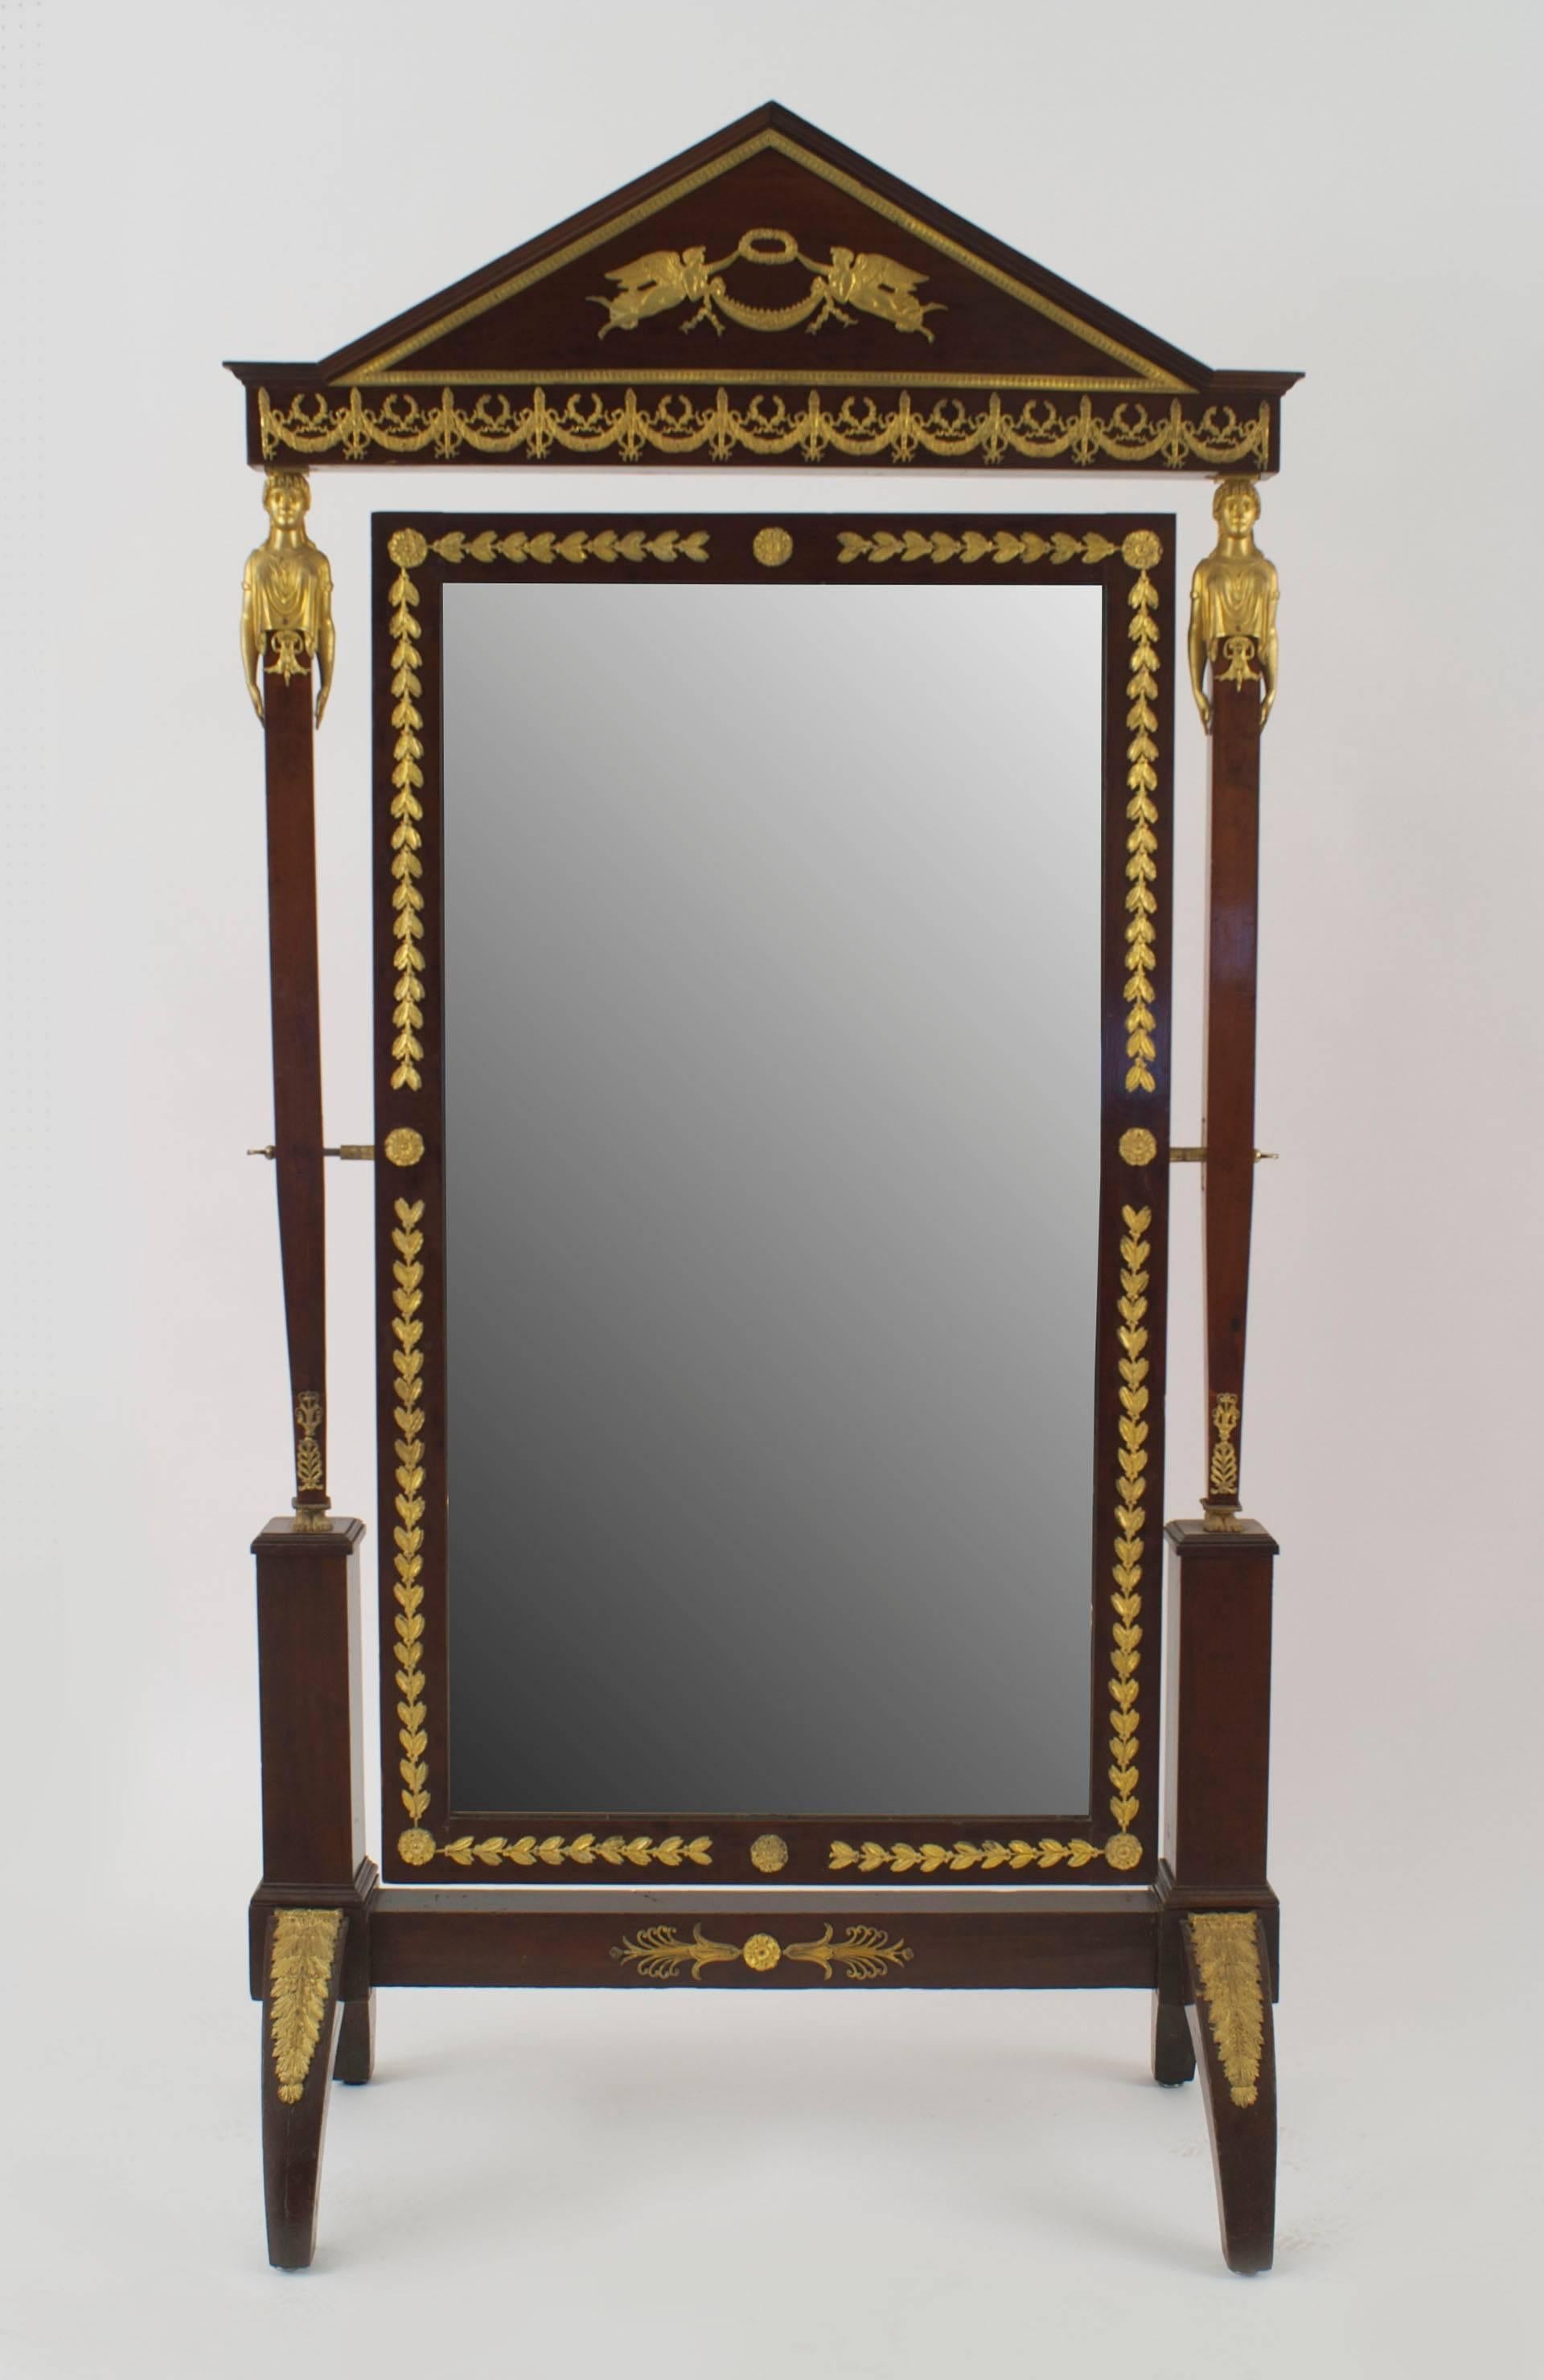 French Empire-style (19th Century) mahogany cheval mirror with bronze trim, caryatid figures, and a pediment top.
